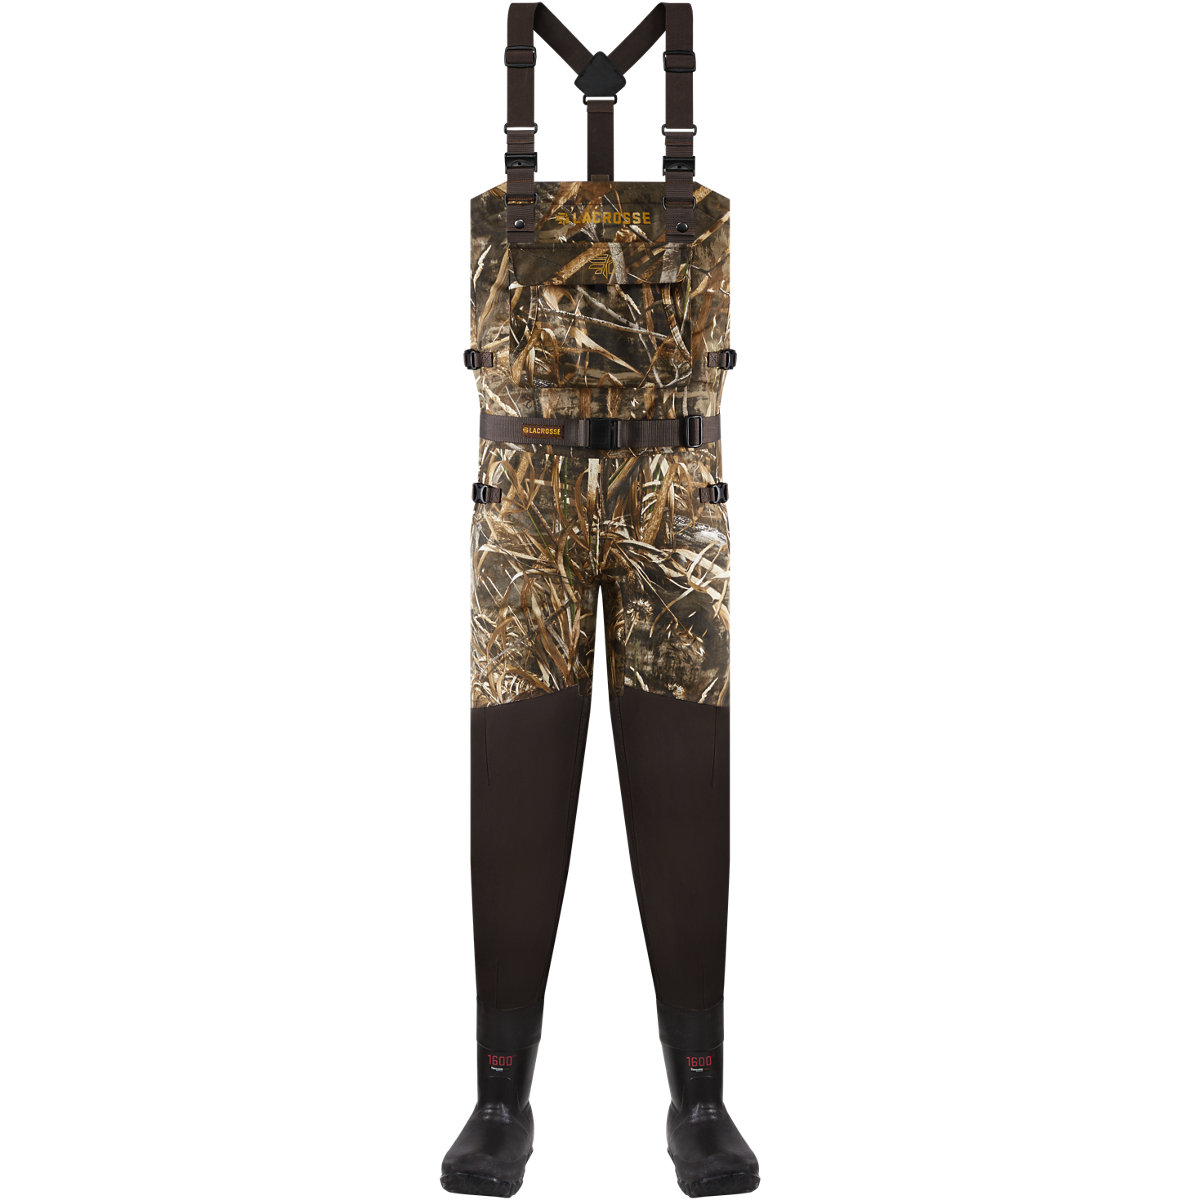 Women's Lacrosse Hail Call Breathable Realtree Max-5 1600G Wader